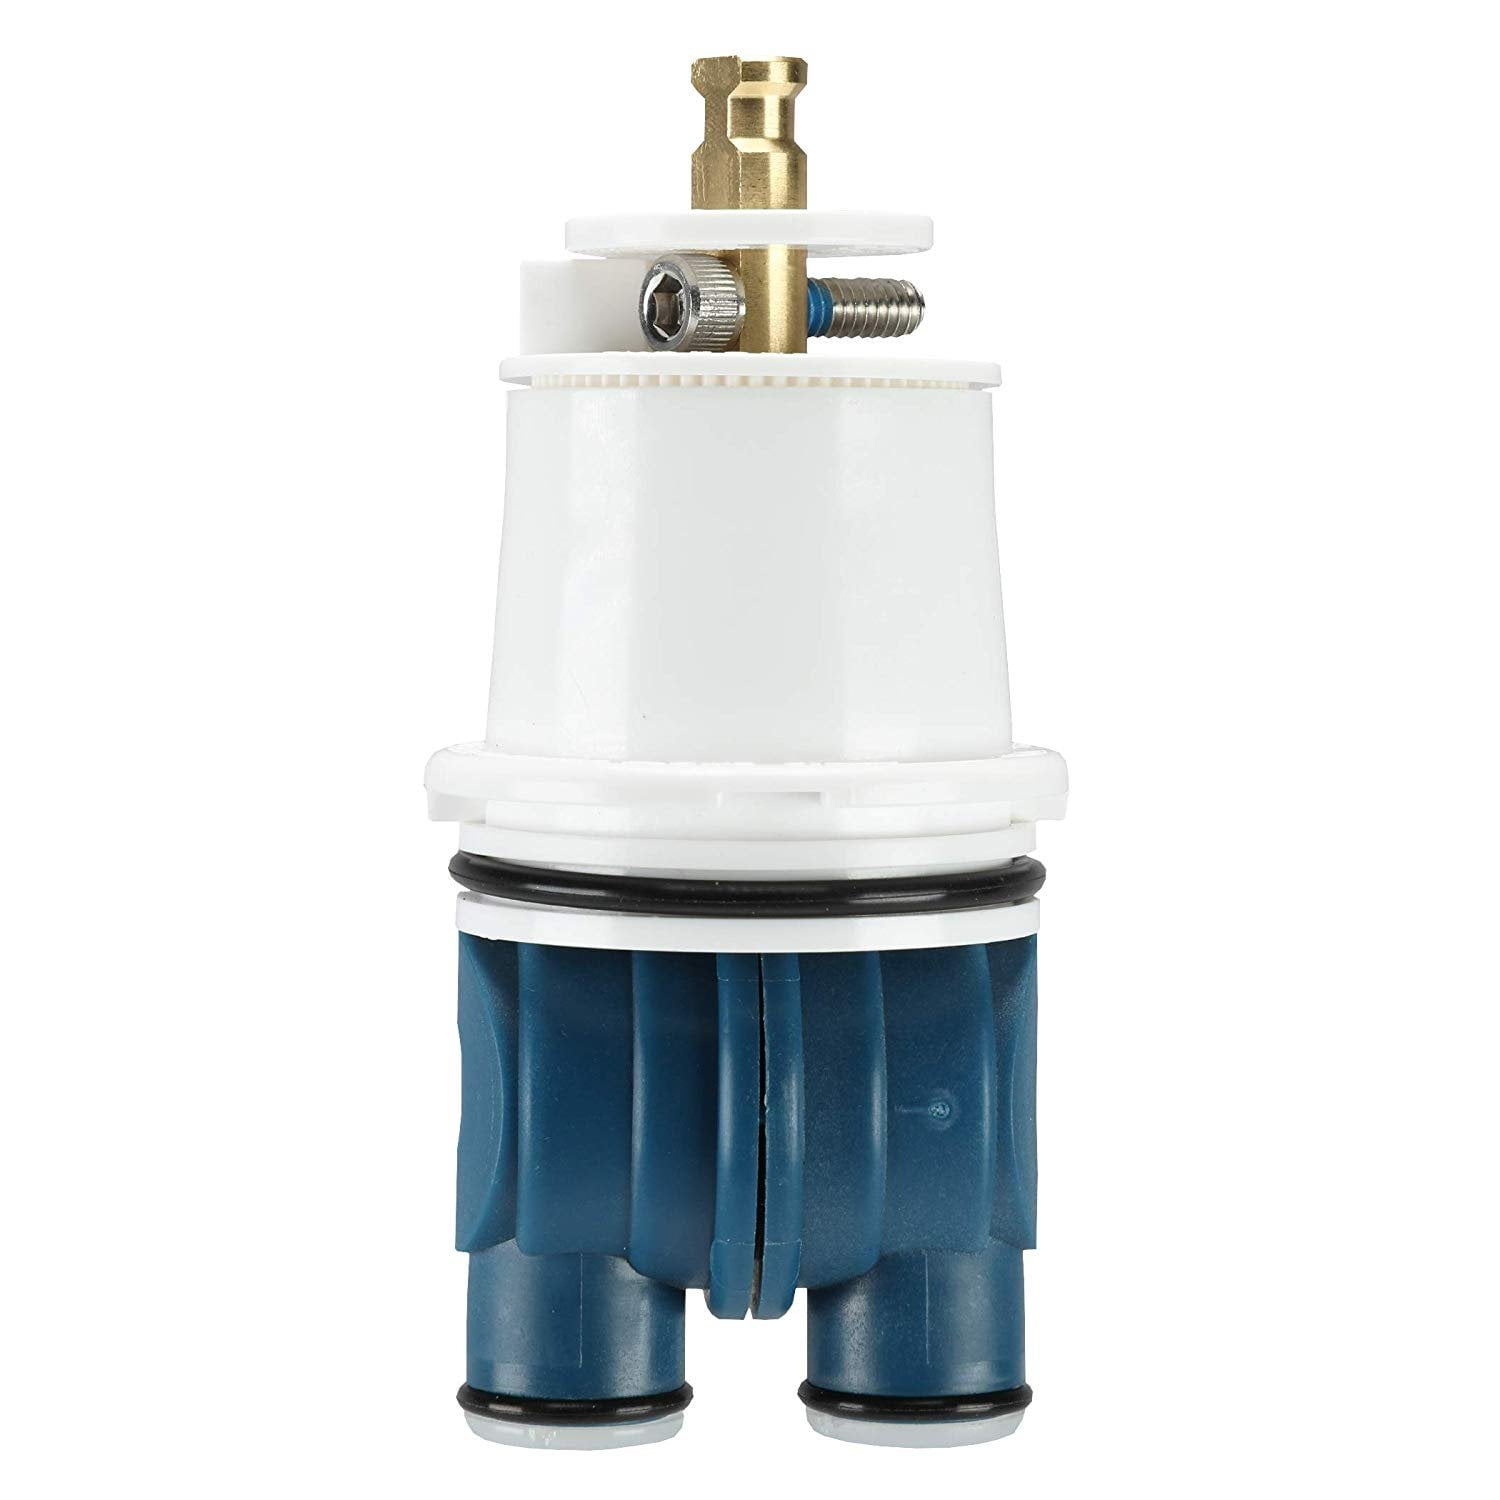 Delta Monitor Shower Valve Cartridge, How To Replace Bathtub Faucet Cartridge